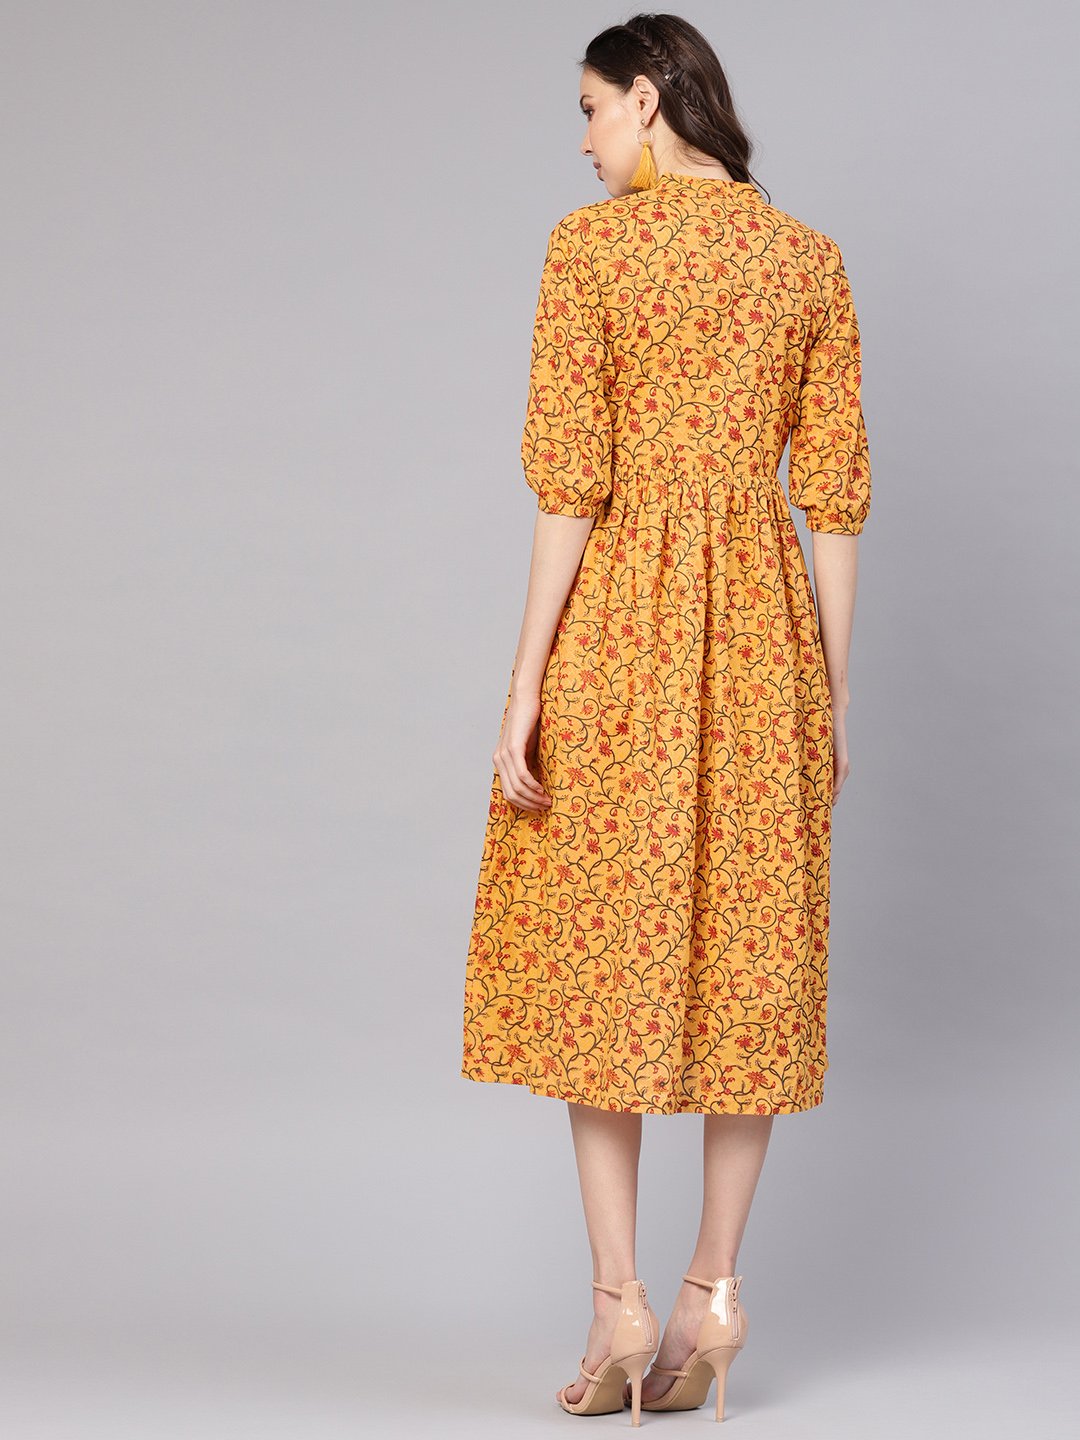 Women's Mustard Yellow & Red Printed A-Line Dress - Nayo Clothing